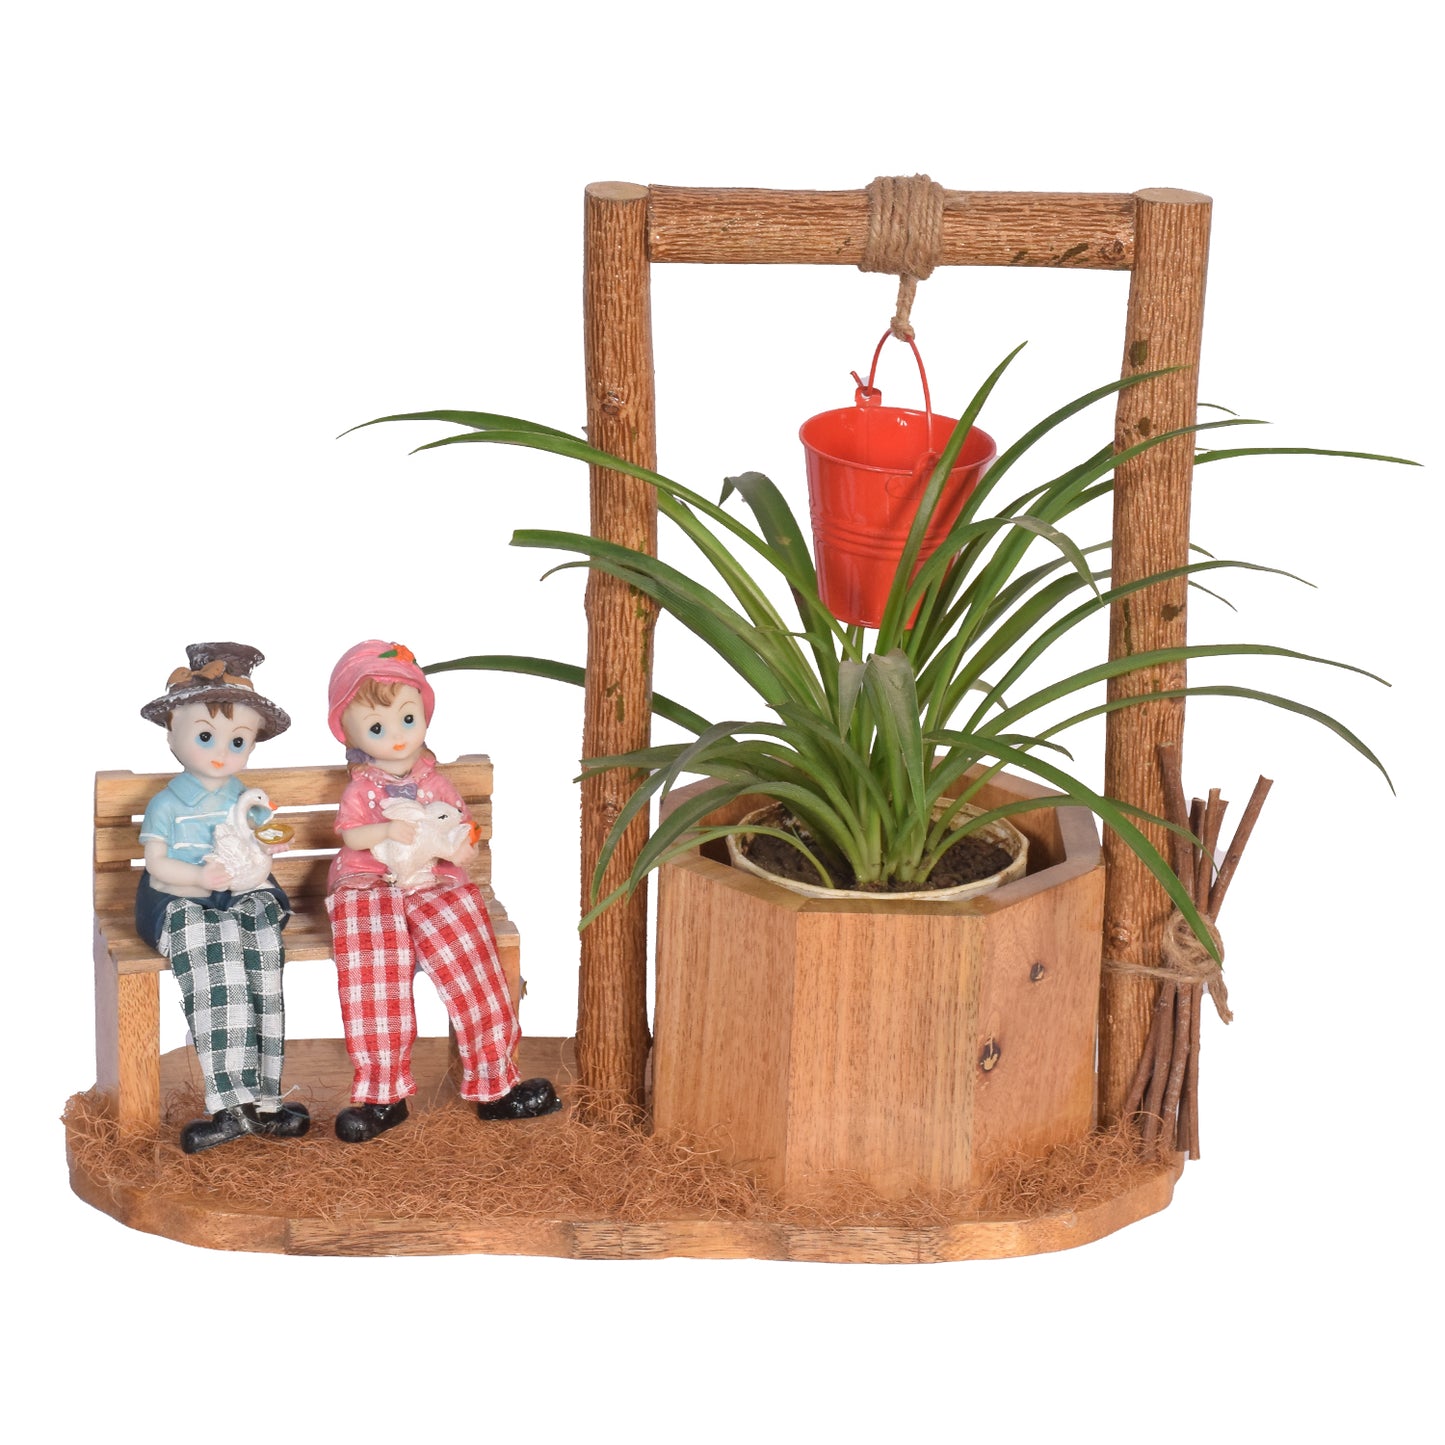 The Weaver's Nest Wishing Well Planter with Figurines sitting on Bench